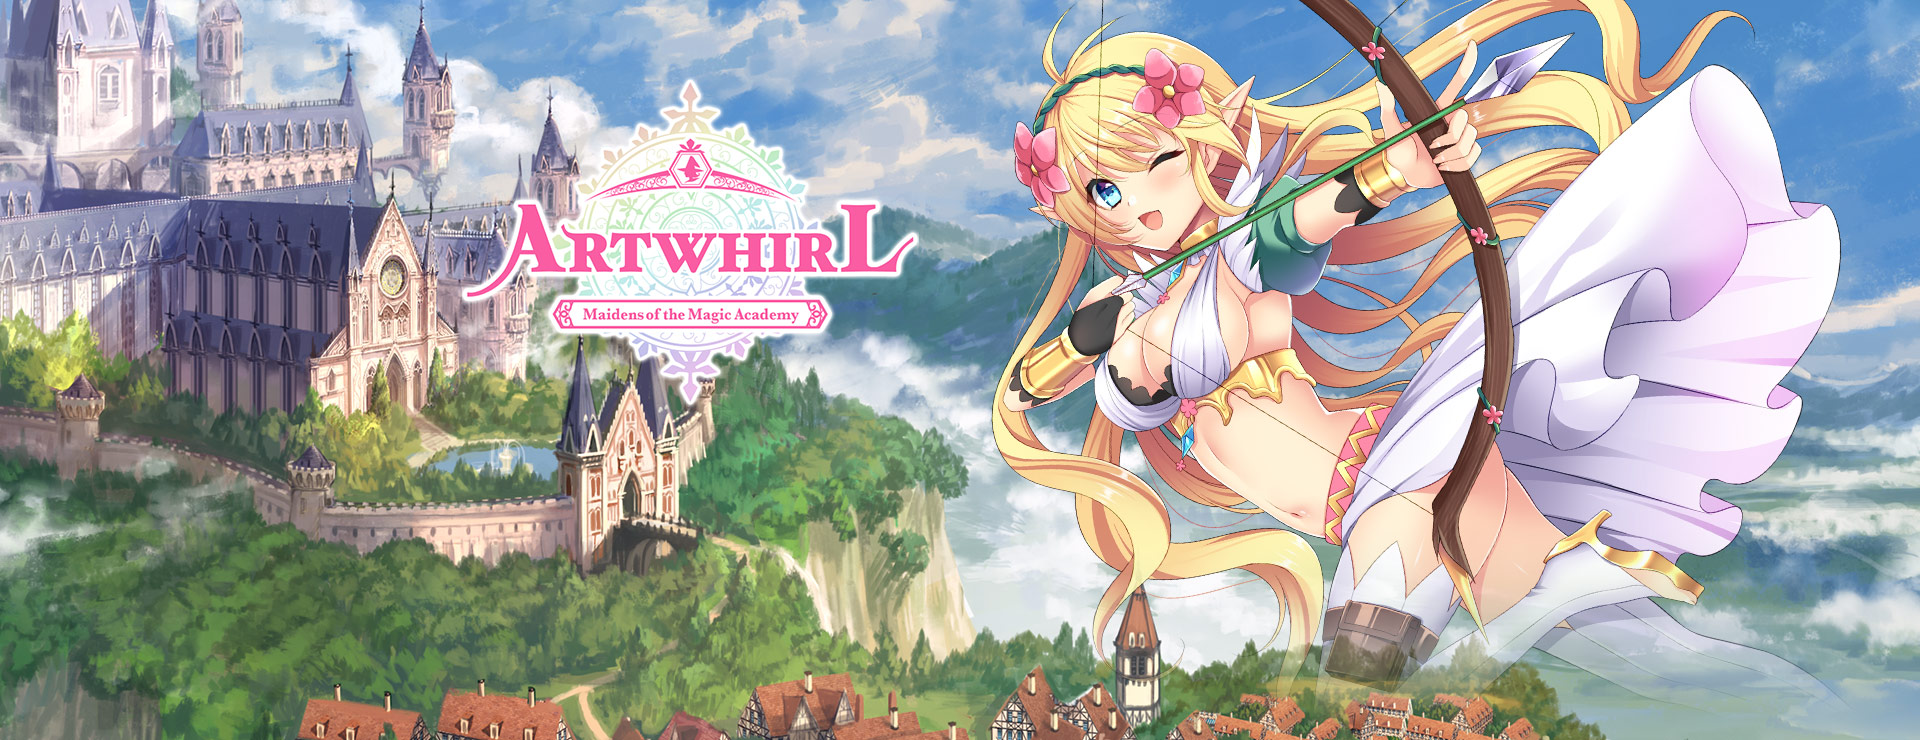 Artwhirl -Maidens of the Magic Academy- - RPG Juego